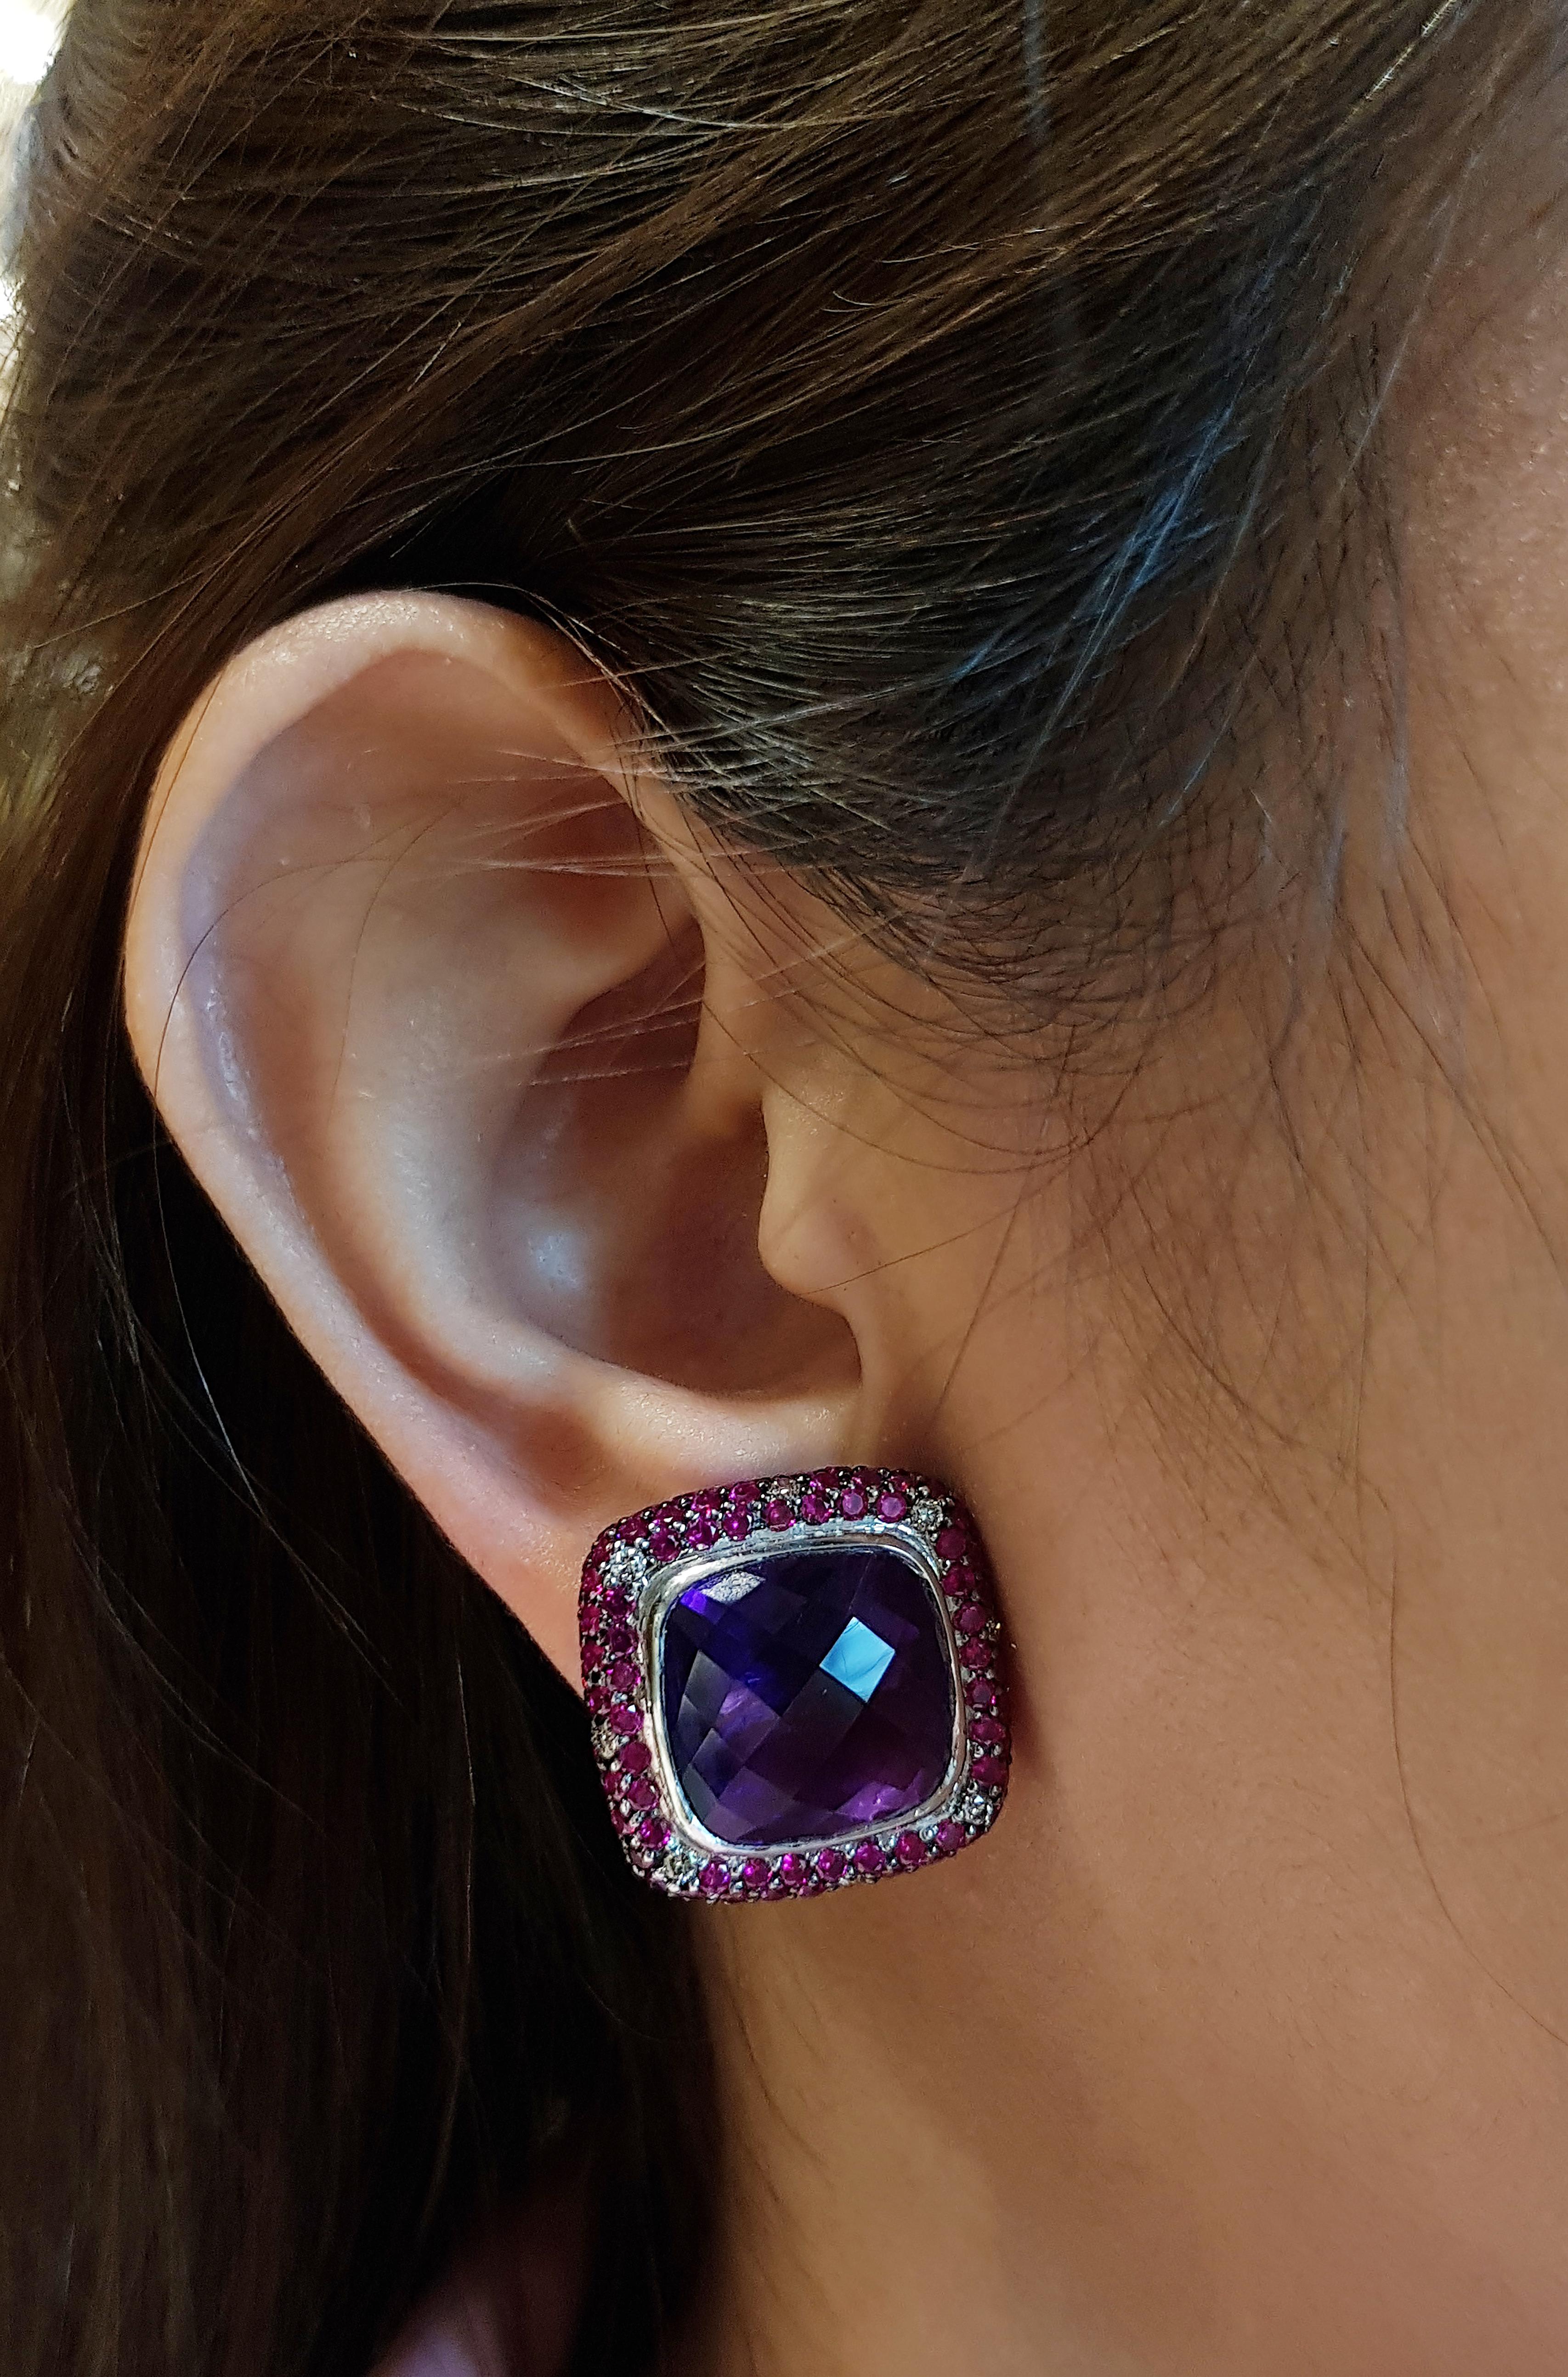 Amethyst 20.27 carats with Ruby 3.84 carats and Brown Diamond 0.30 carat Earrings set in 18 Karat White Gold Settings

Width:  2.0 cm 
Length: 2.0 cm
Total Weight: 21.29 grams

